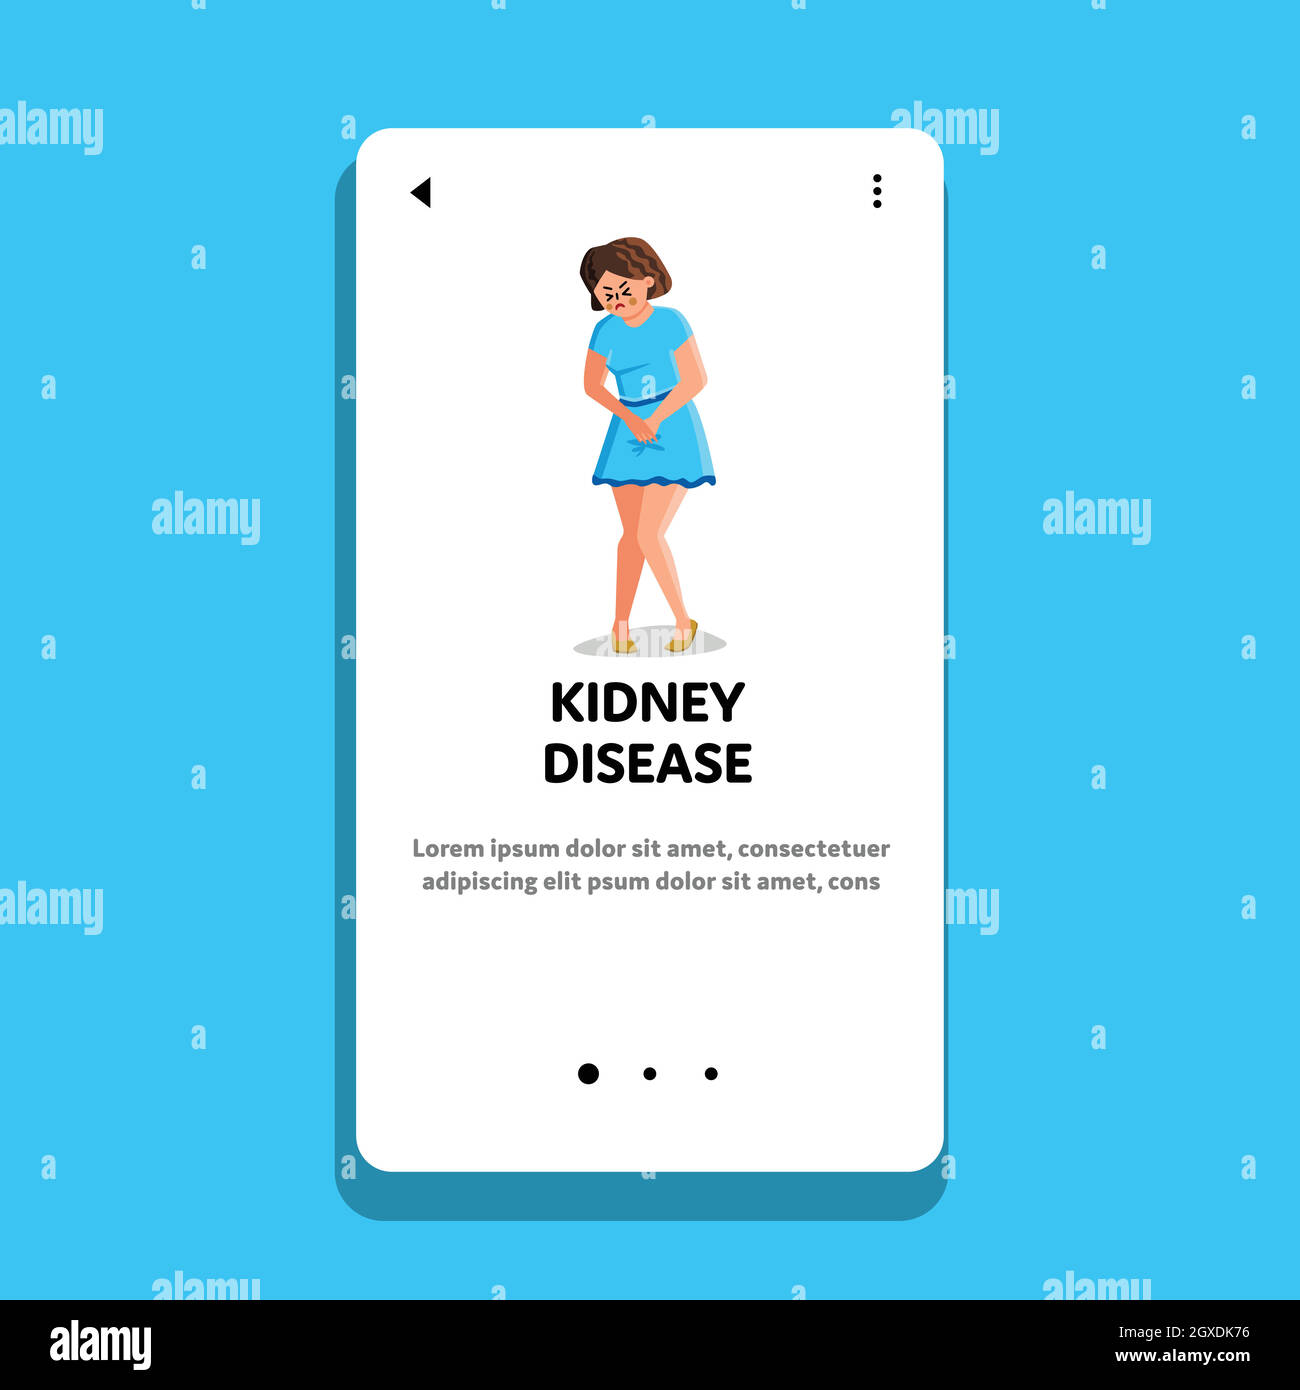 Woman With Kidney Disease Health Problem Vector Stock Vector